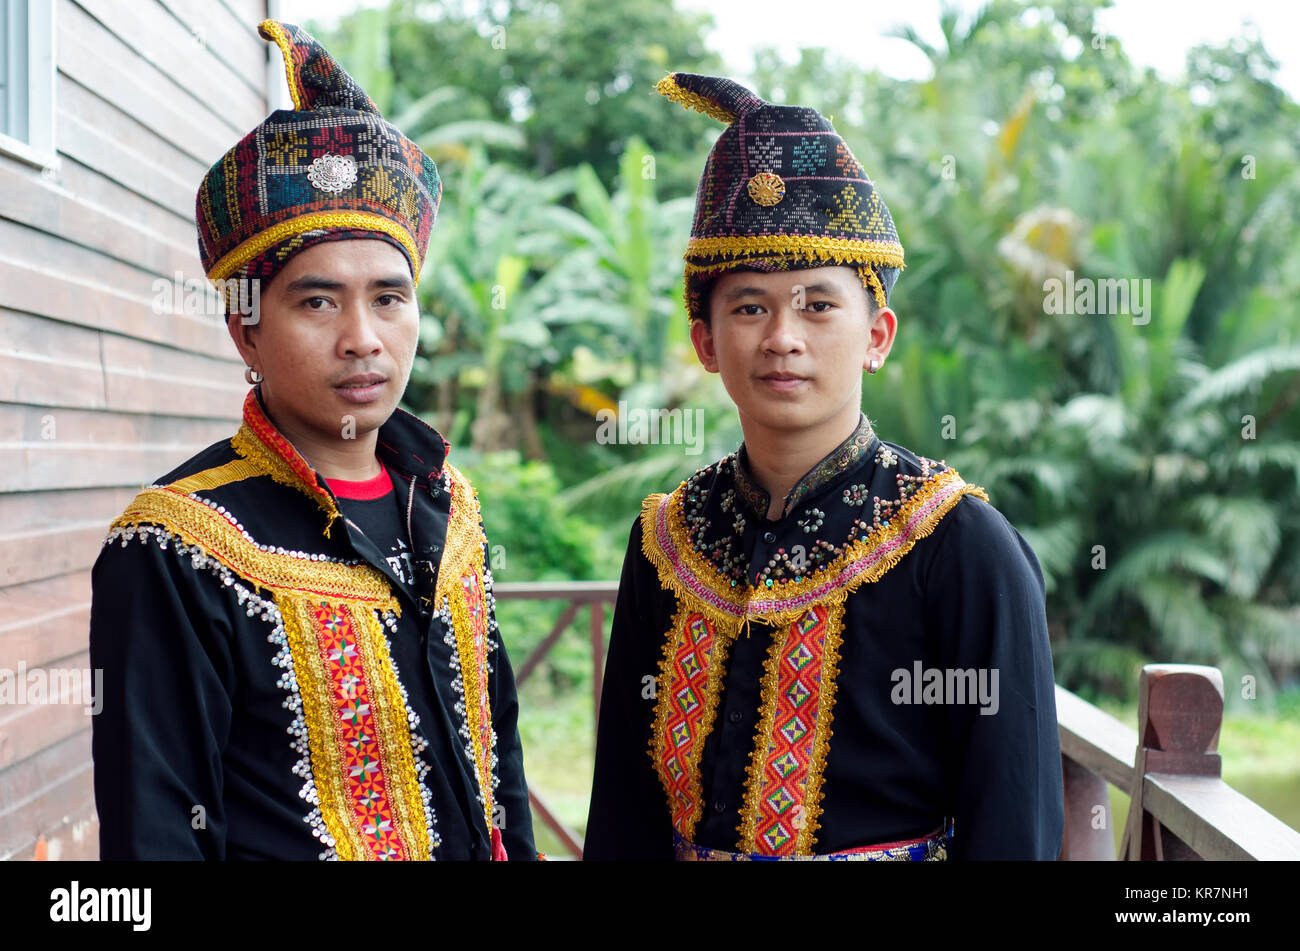 Young Men From Indigenous people of Sabah Borneo in East Malaysia in ...